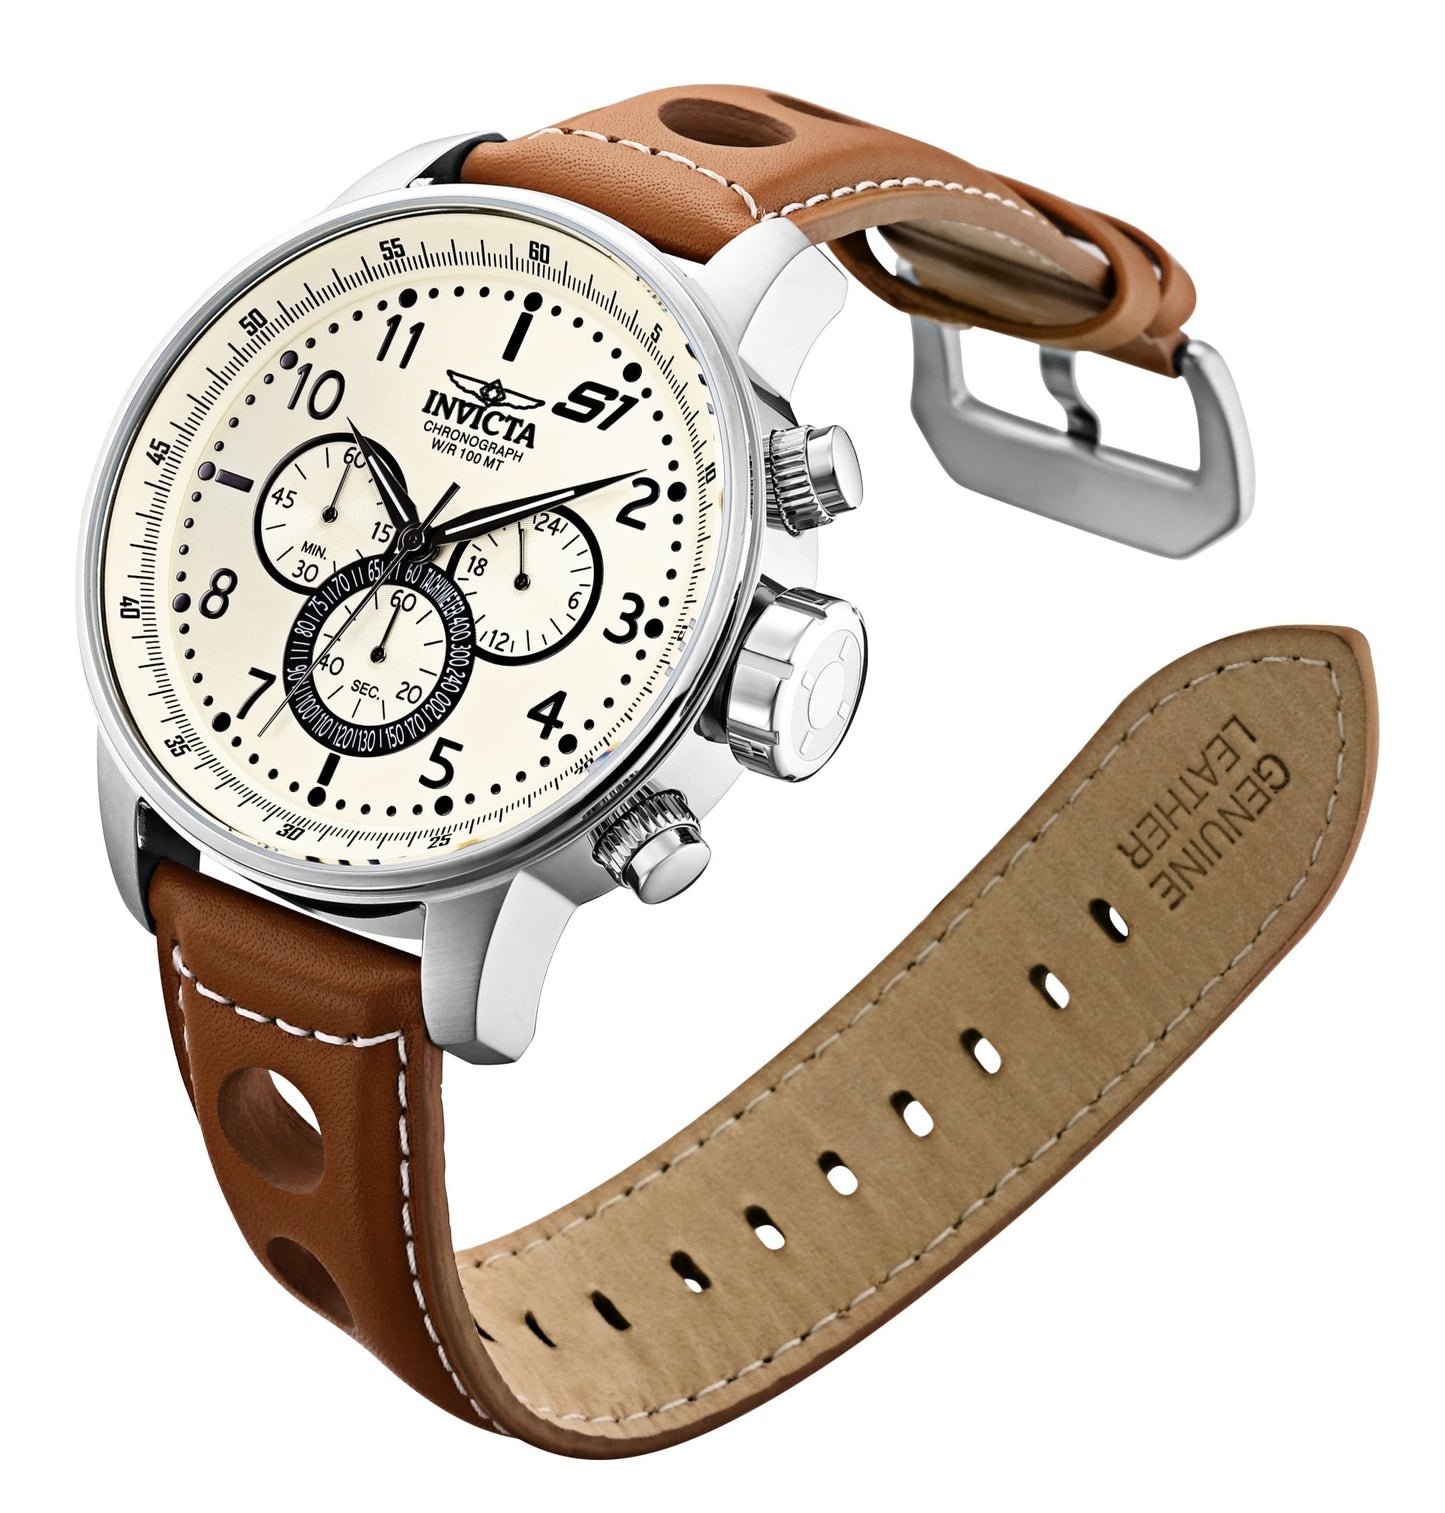 Detail angled view of Invicta S1 Rally 16009 with white dial and brown leather strap